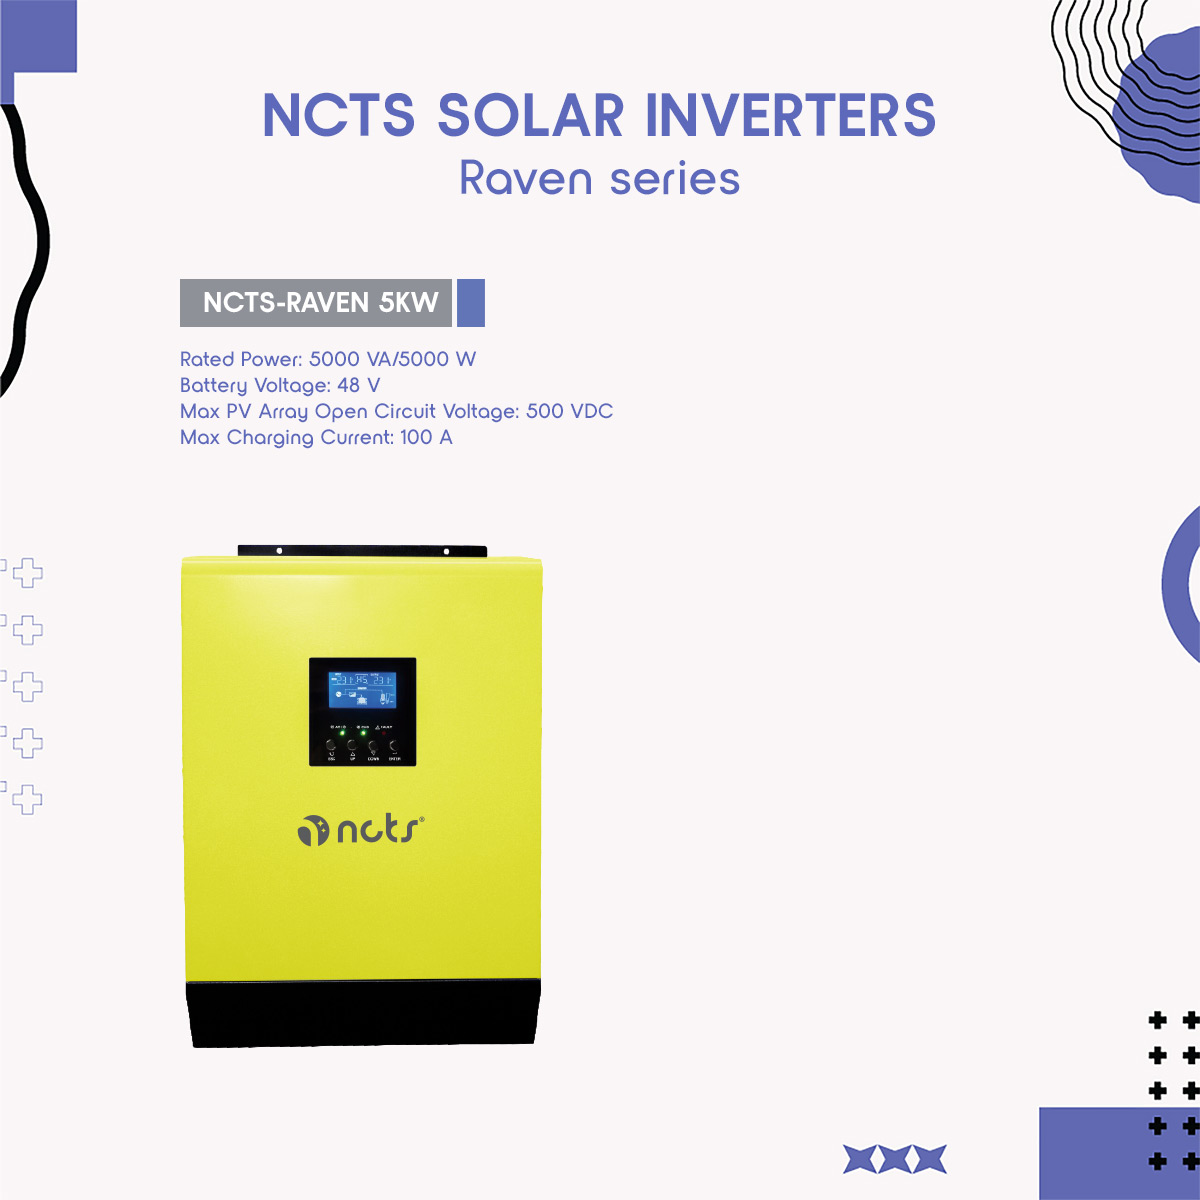 NCTS-RAVEN 5KW